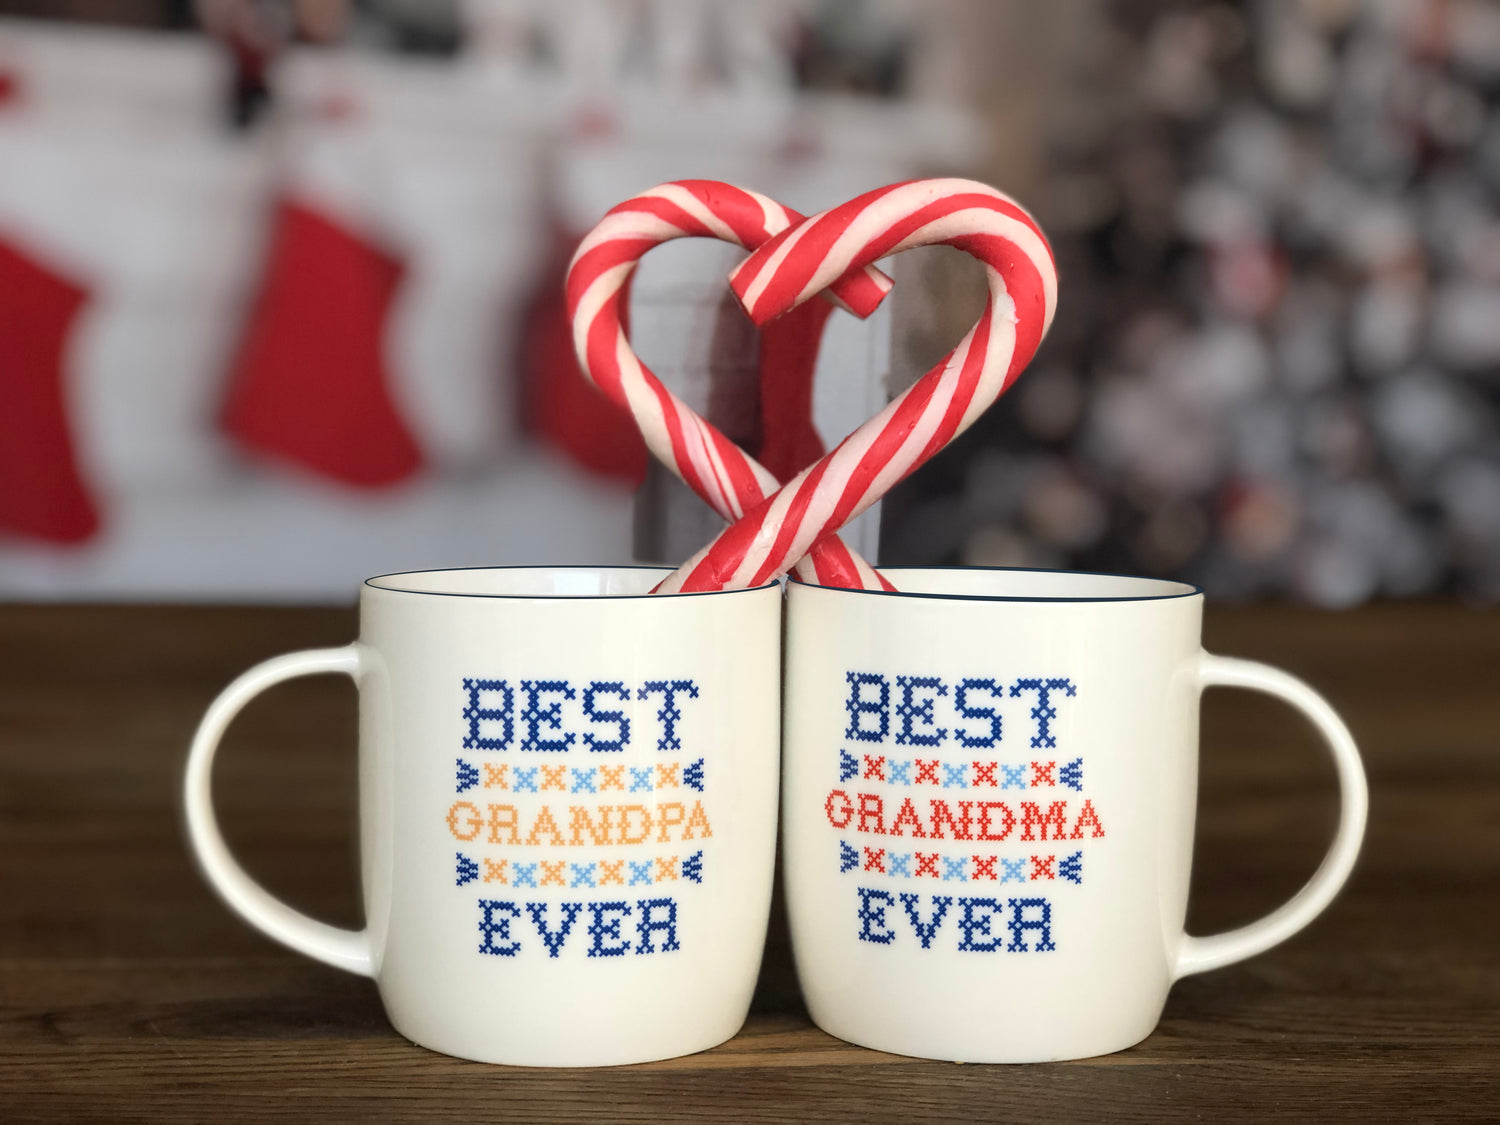 Best Grandparents Ever Gifts Mugs